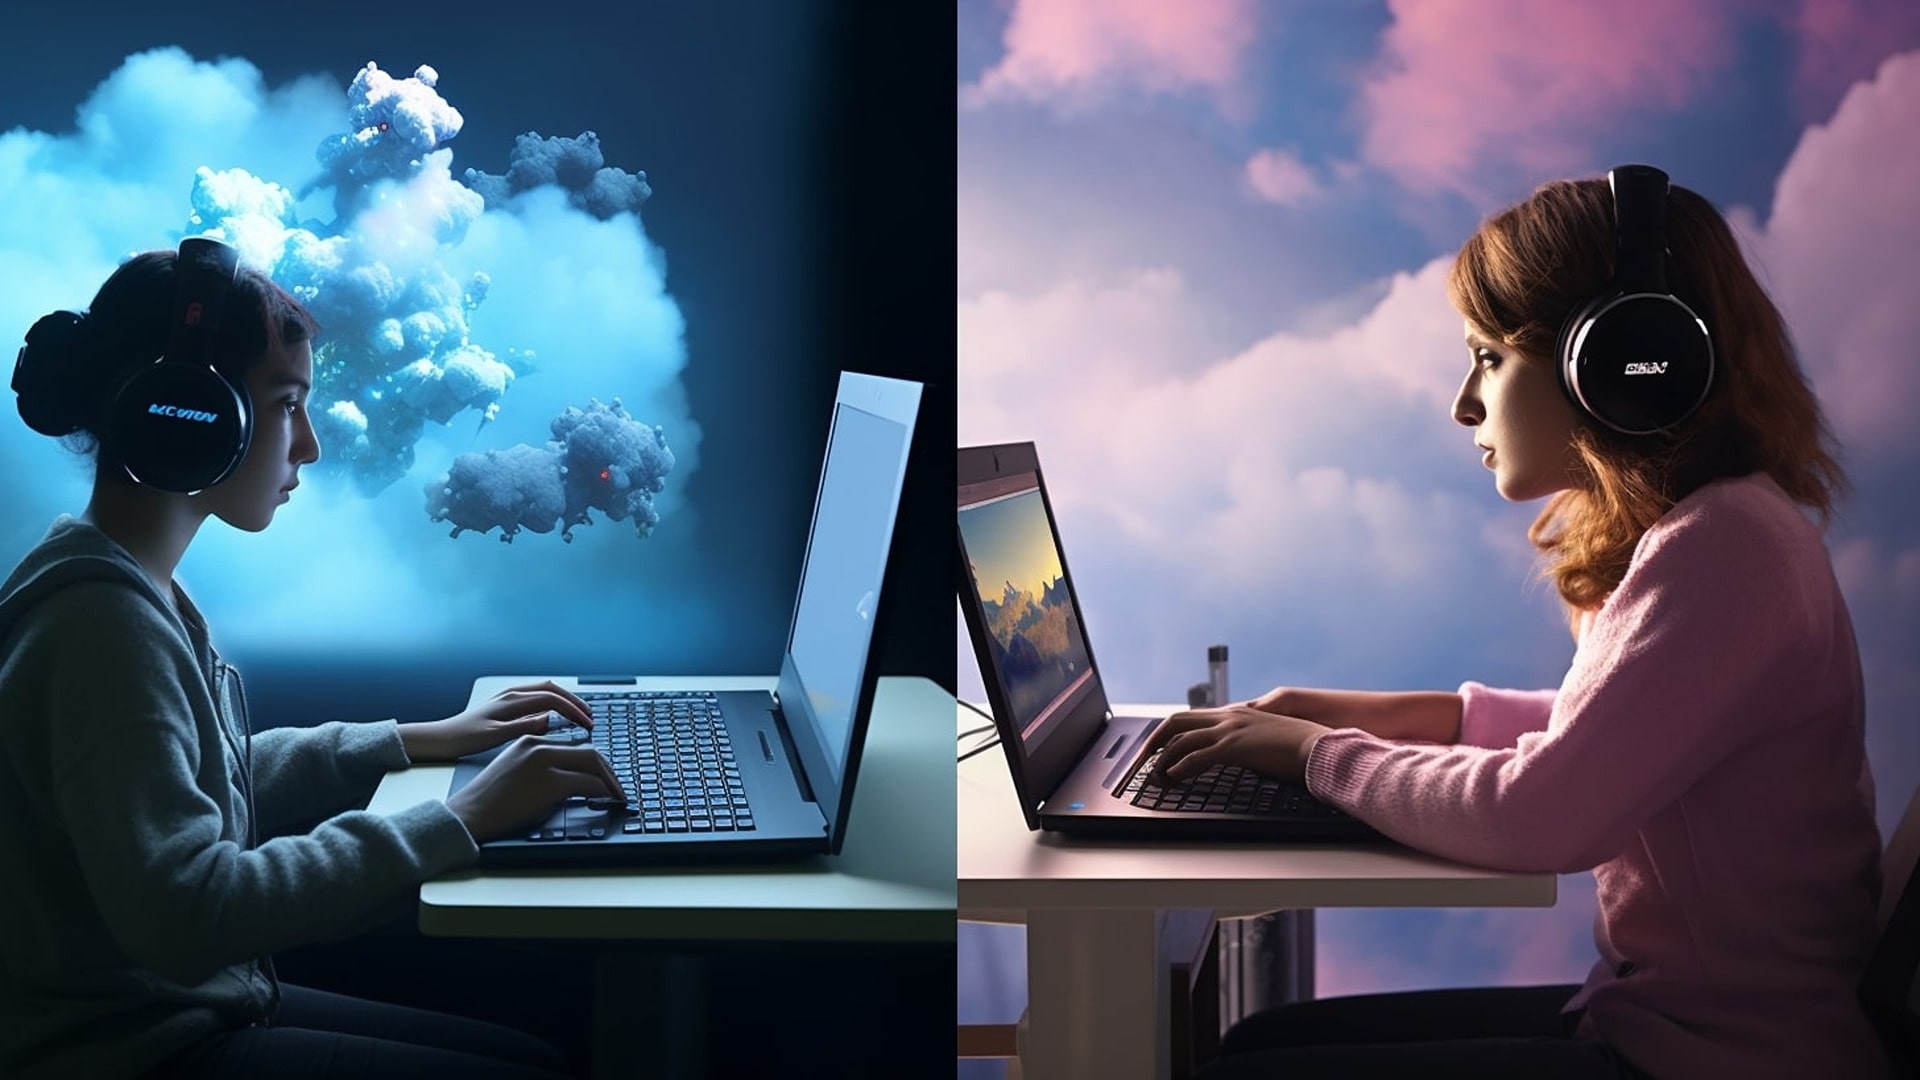 A gamer on a laptop showcasing the juxtaposition of traditional gaming and cloud-based gaming.